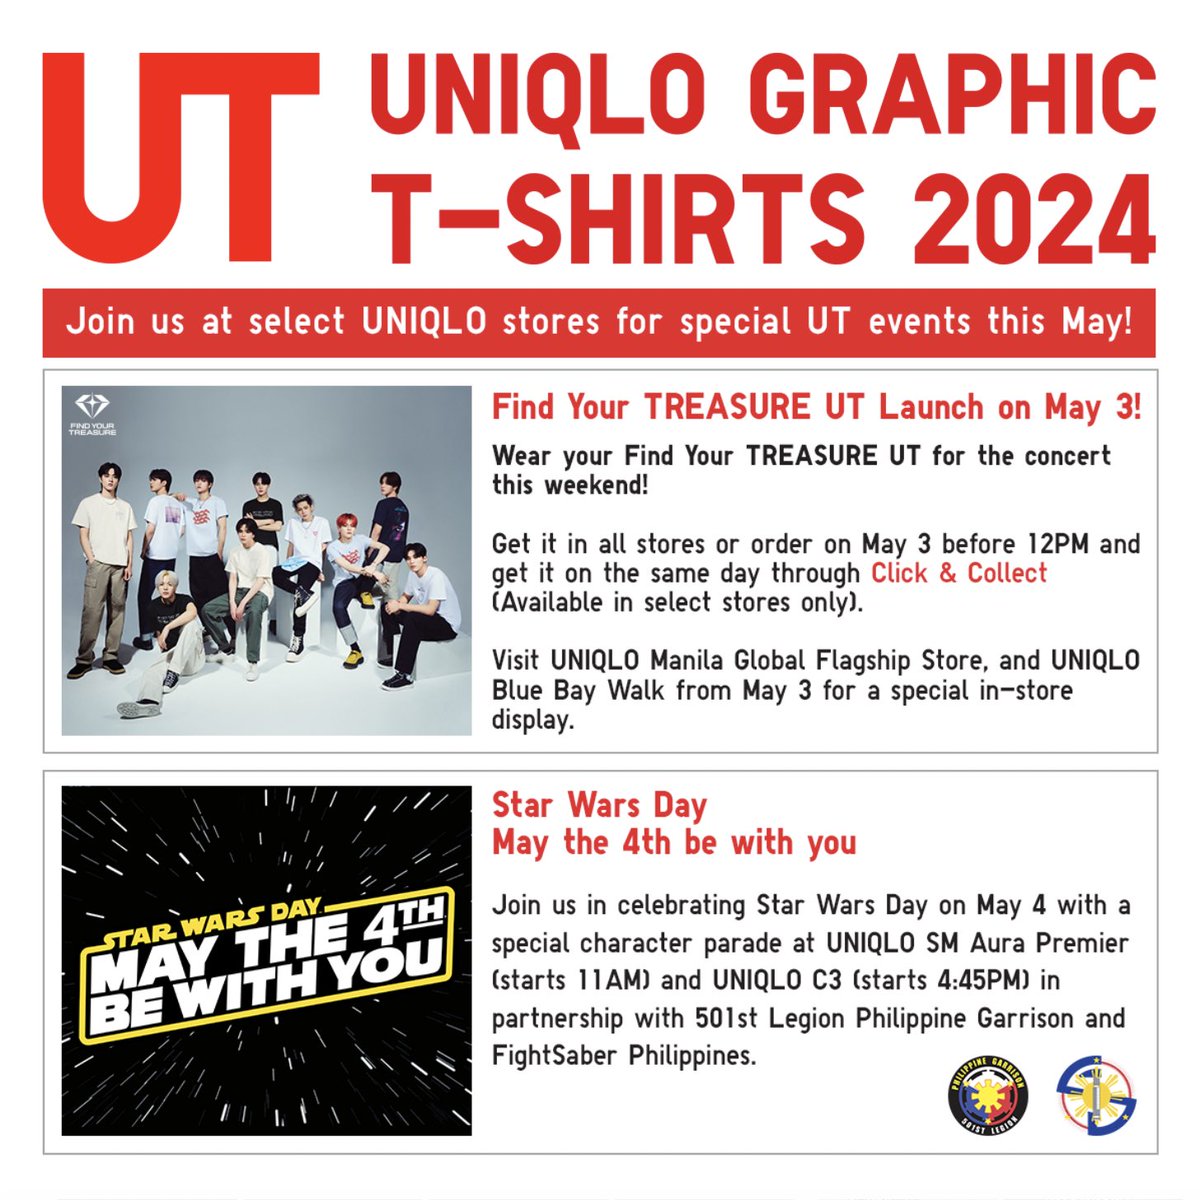 Excited for the new UTs launching?

Join us in celebrating Find Your TREASURE UT on May 3 and Star Wars Day on May 4! Visit any UNIQLO store and get the latest UT collection here: uniqlo.com/ph/en/special-… 

#WithUT #UniqloPH #LifeWear #FINDYOURTREASURE #TREASURE #StarWars